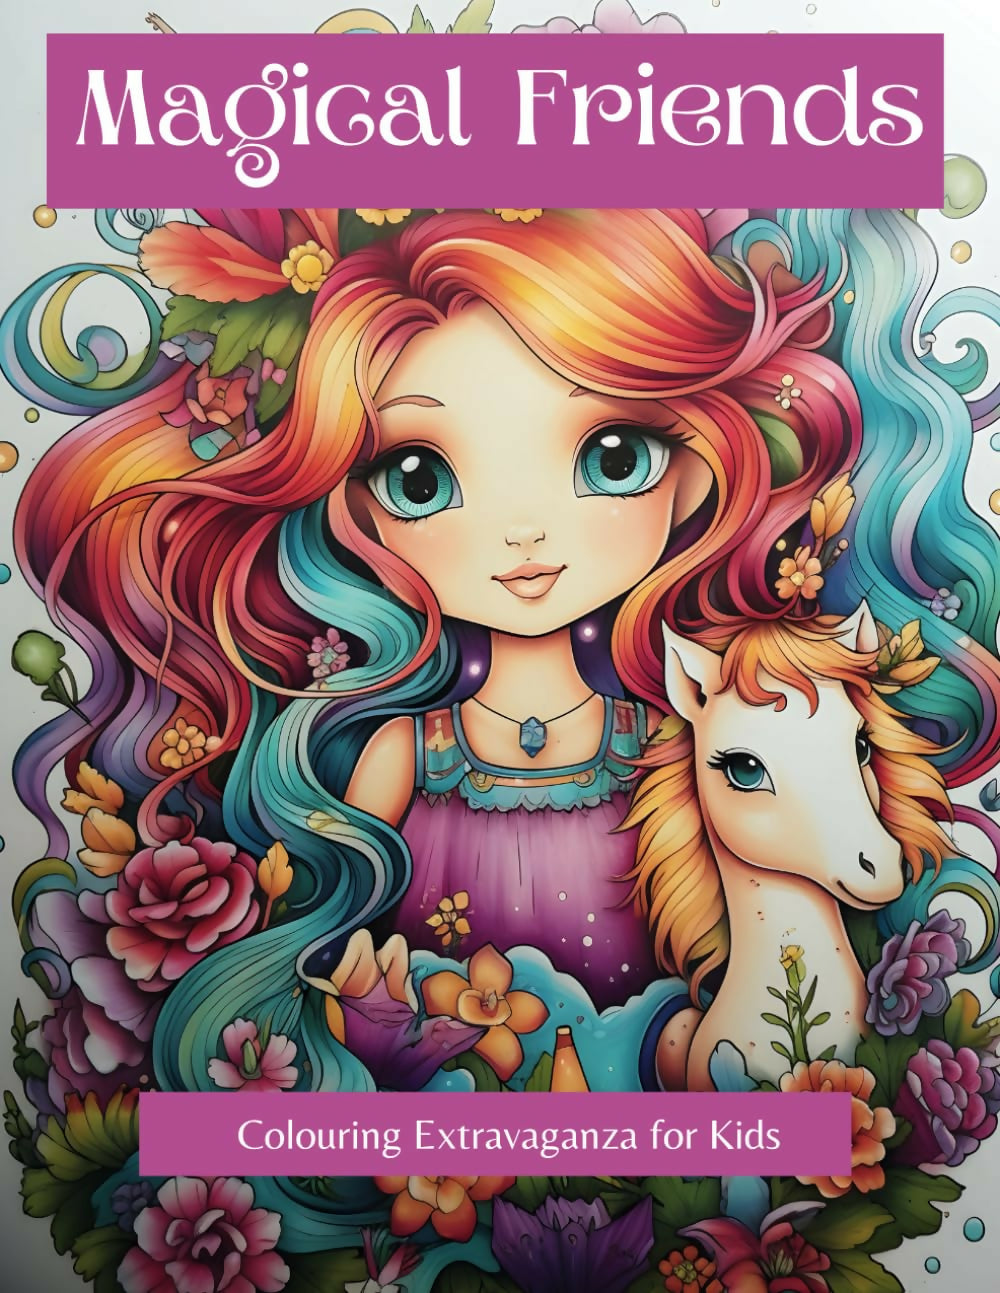 Magical Friends Colouring Extravaganza for Kids